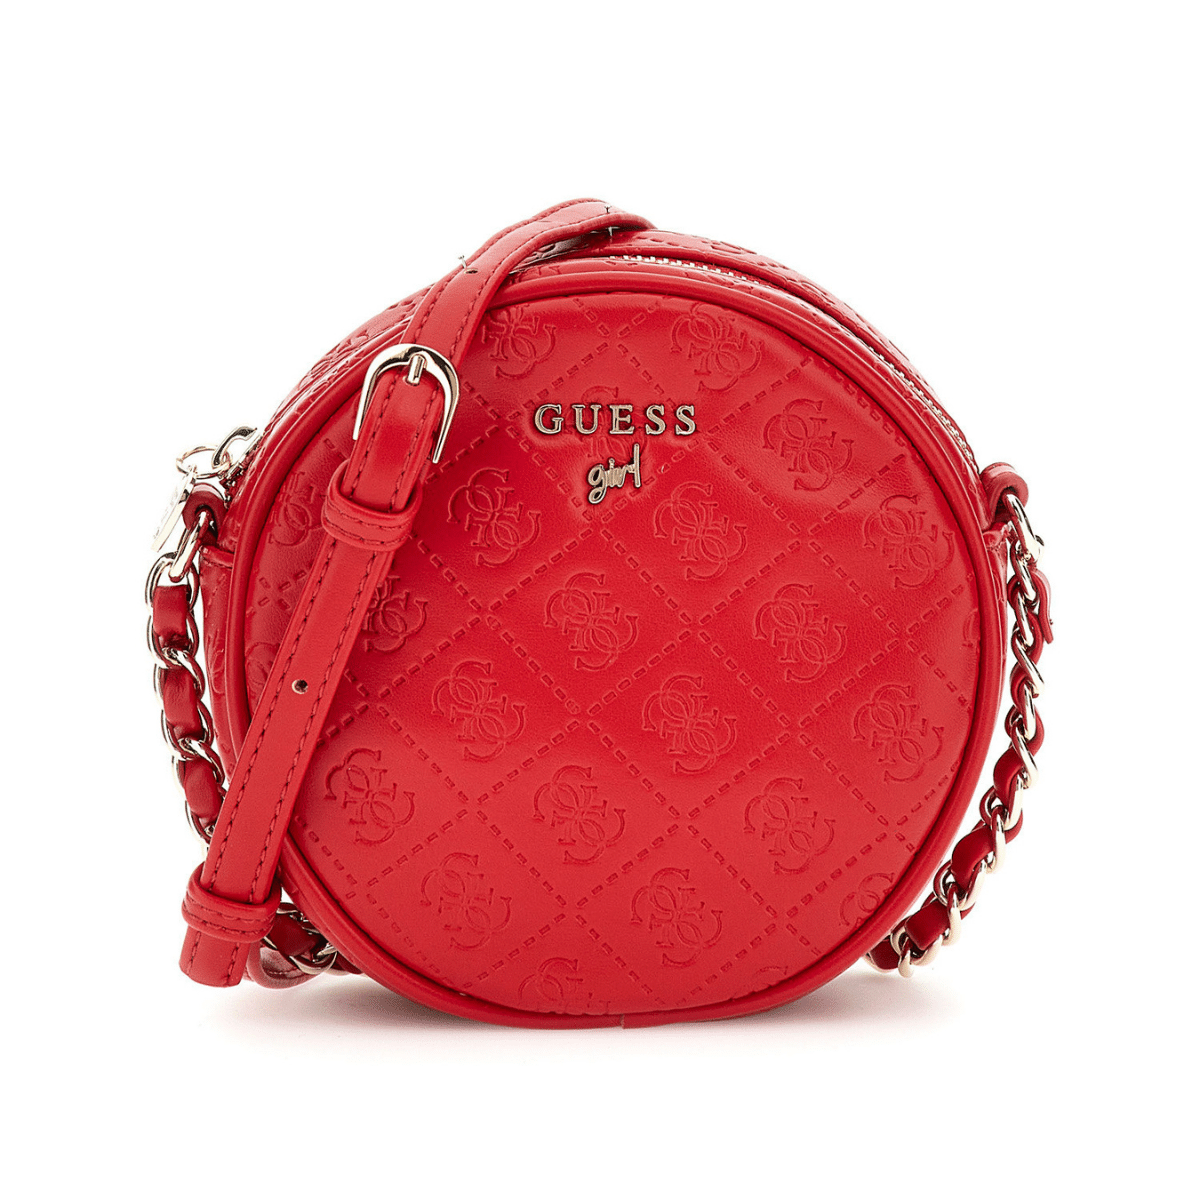 Guess girls red round handbag with gold chain strap